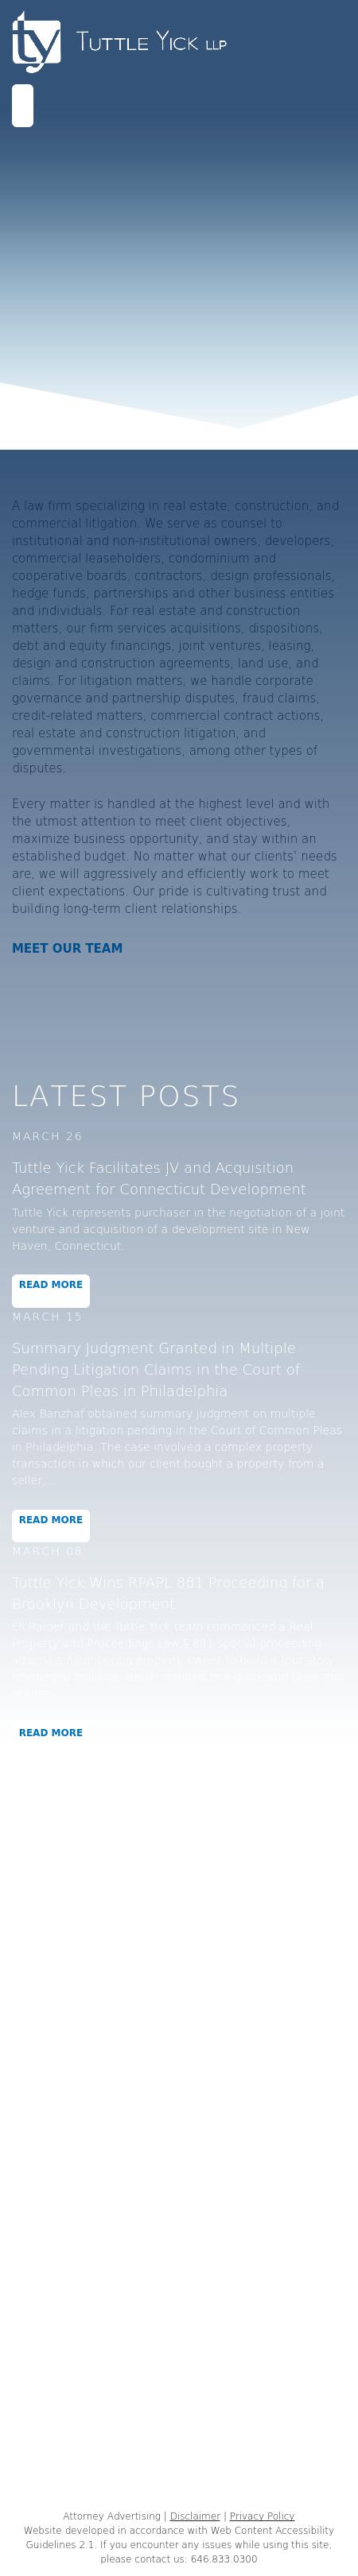 Tuttle Yick LLP - New York NY Lawyers